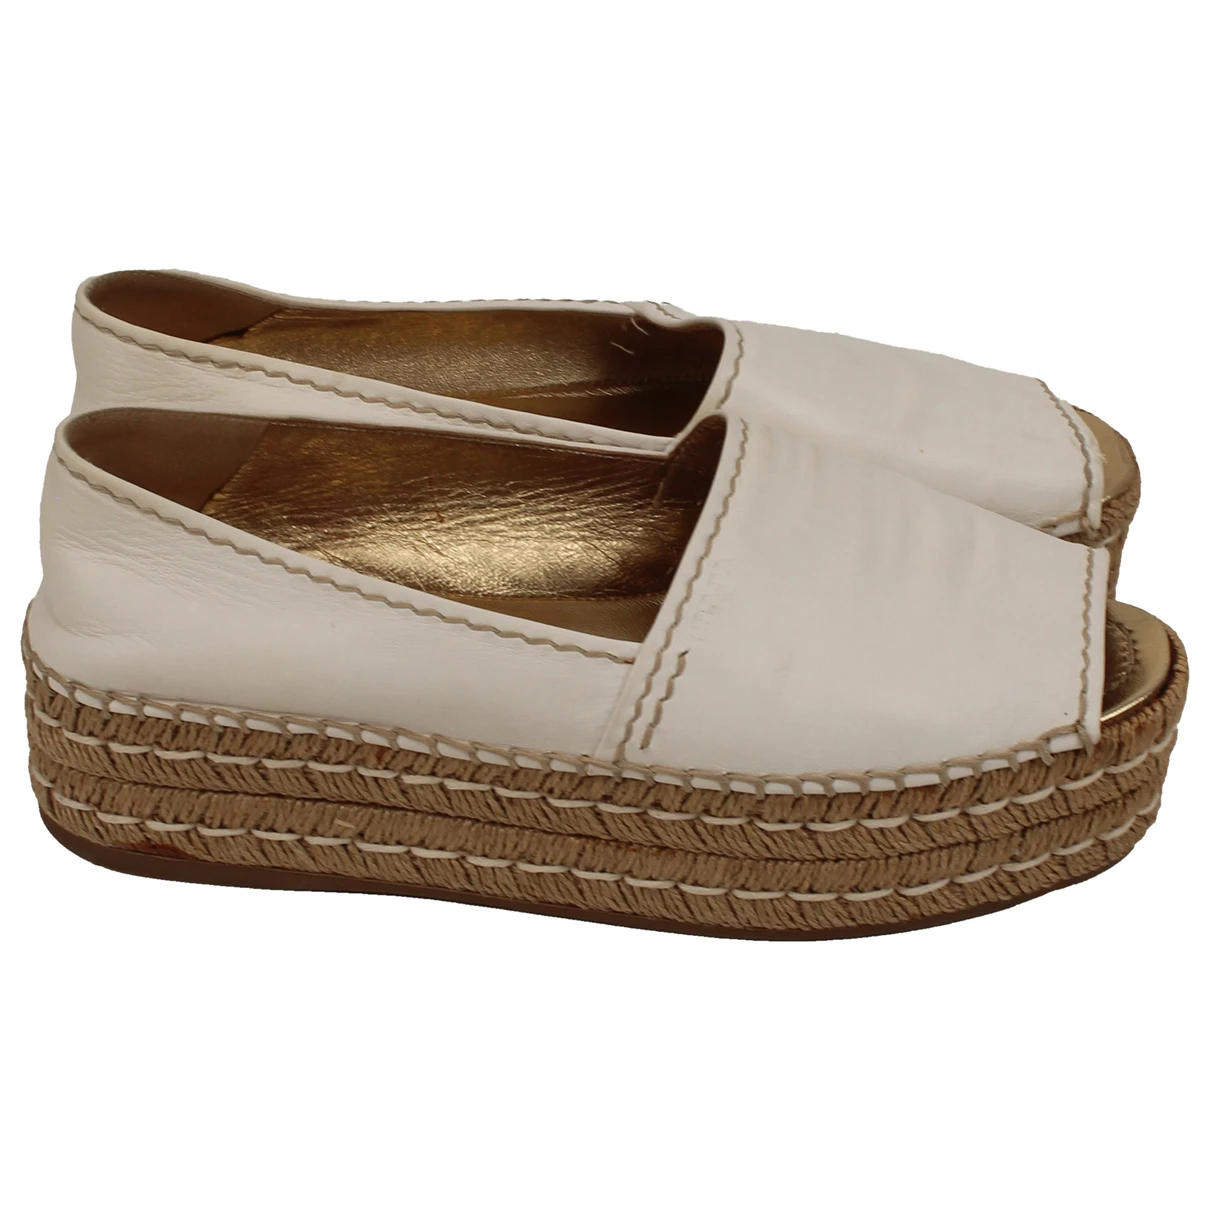 Pre-owned Prada Leather Espadrilles In White